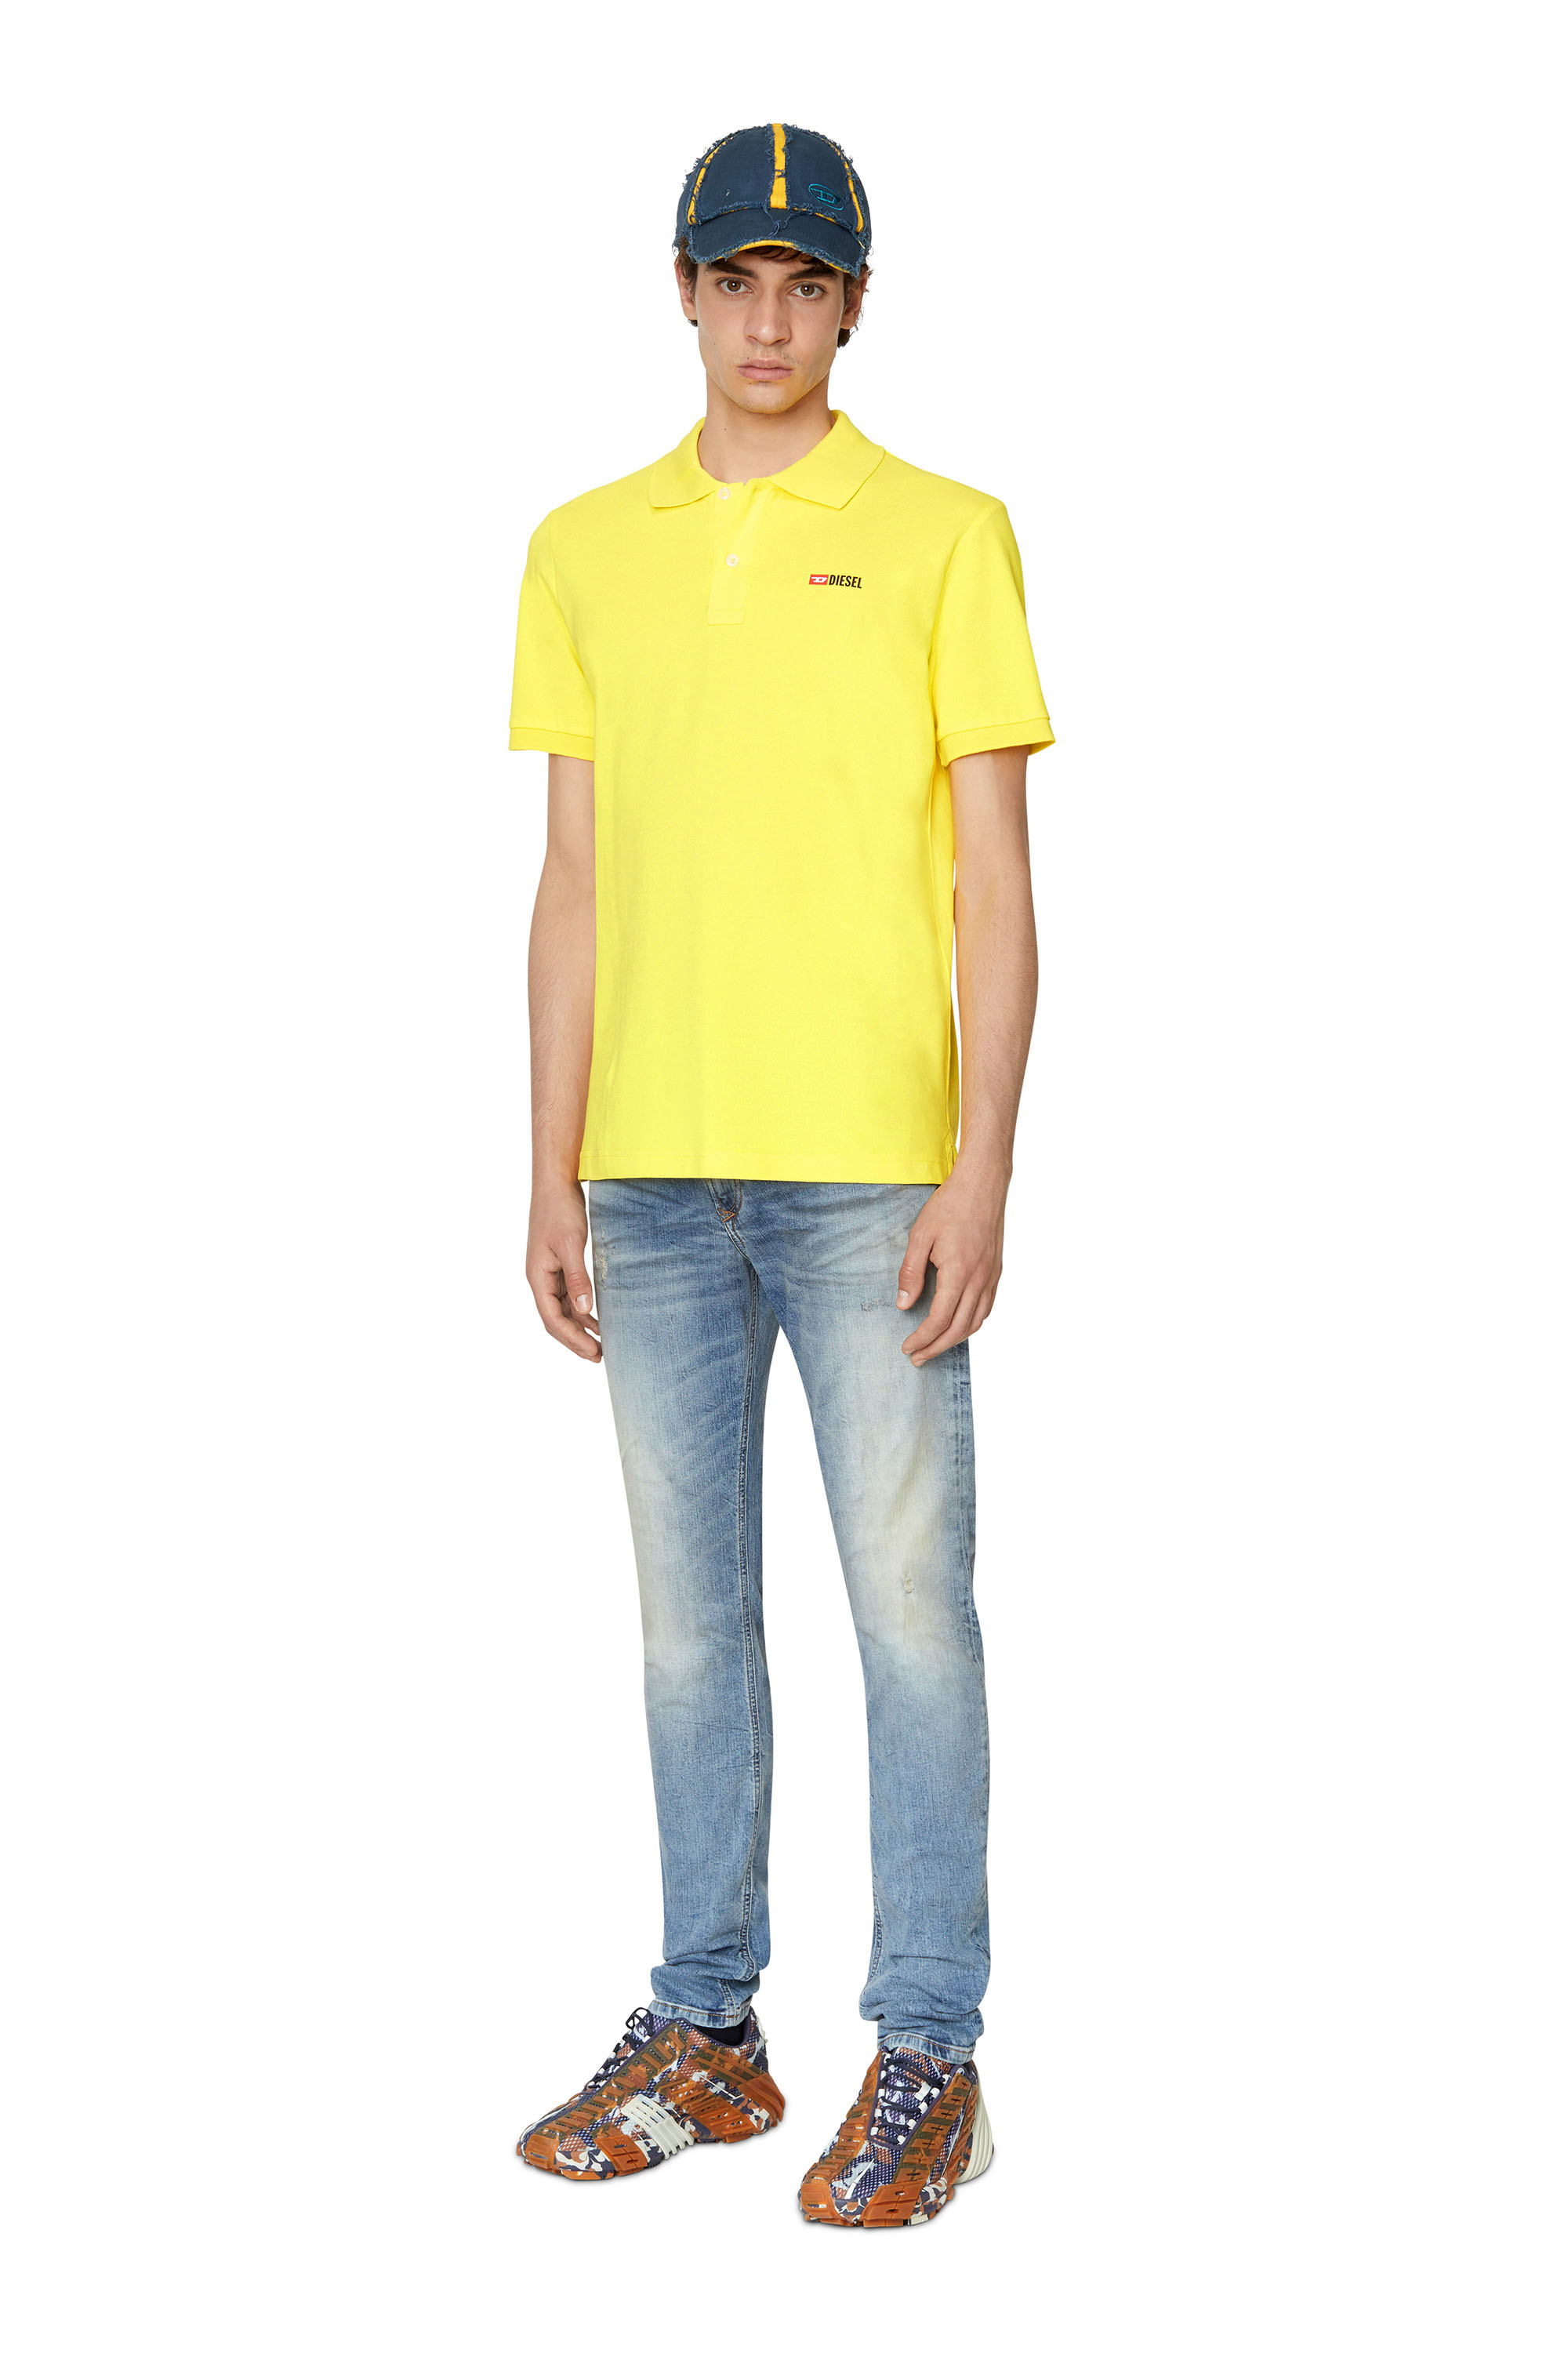 Diesel - T-SMITH-DIV, Yellow - Image 2